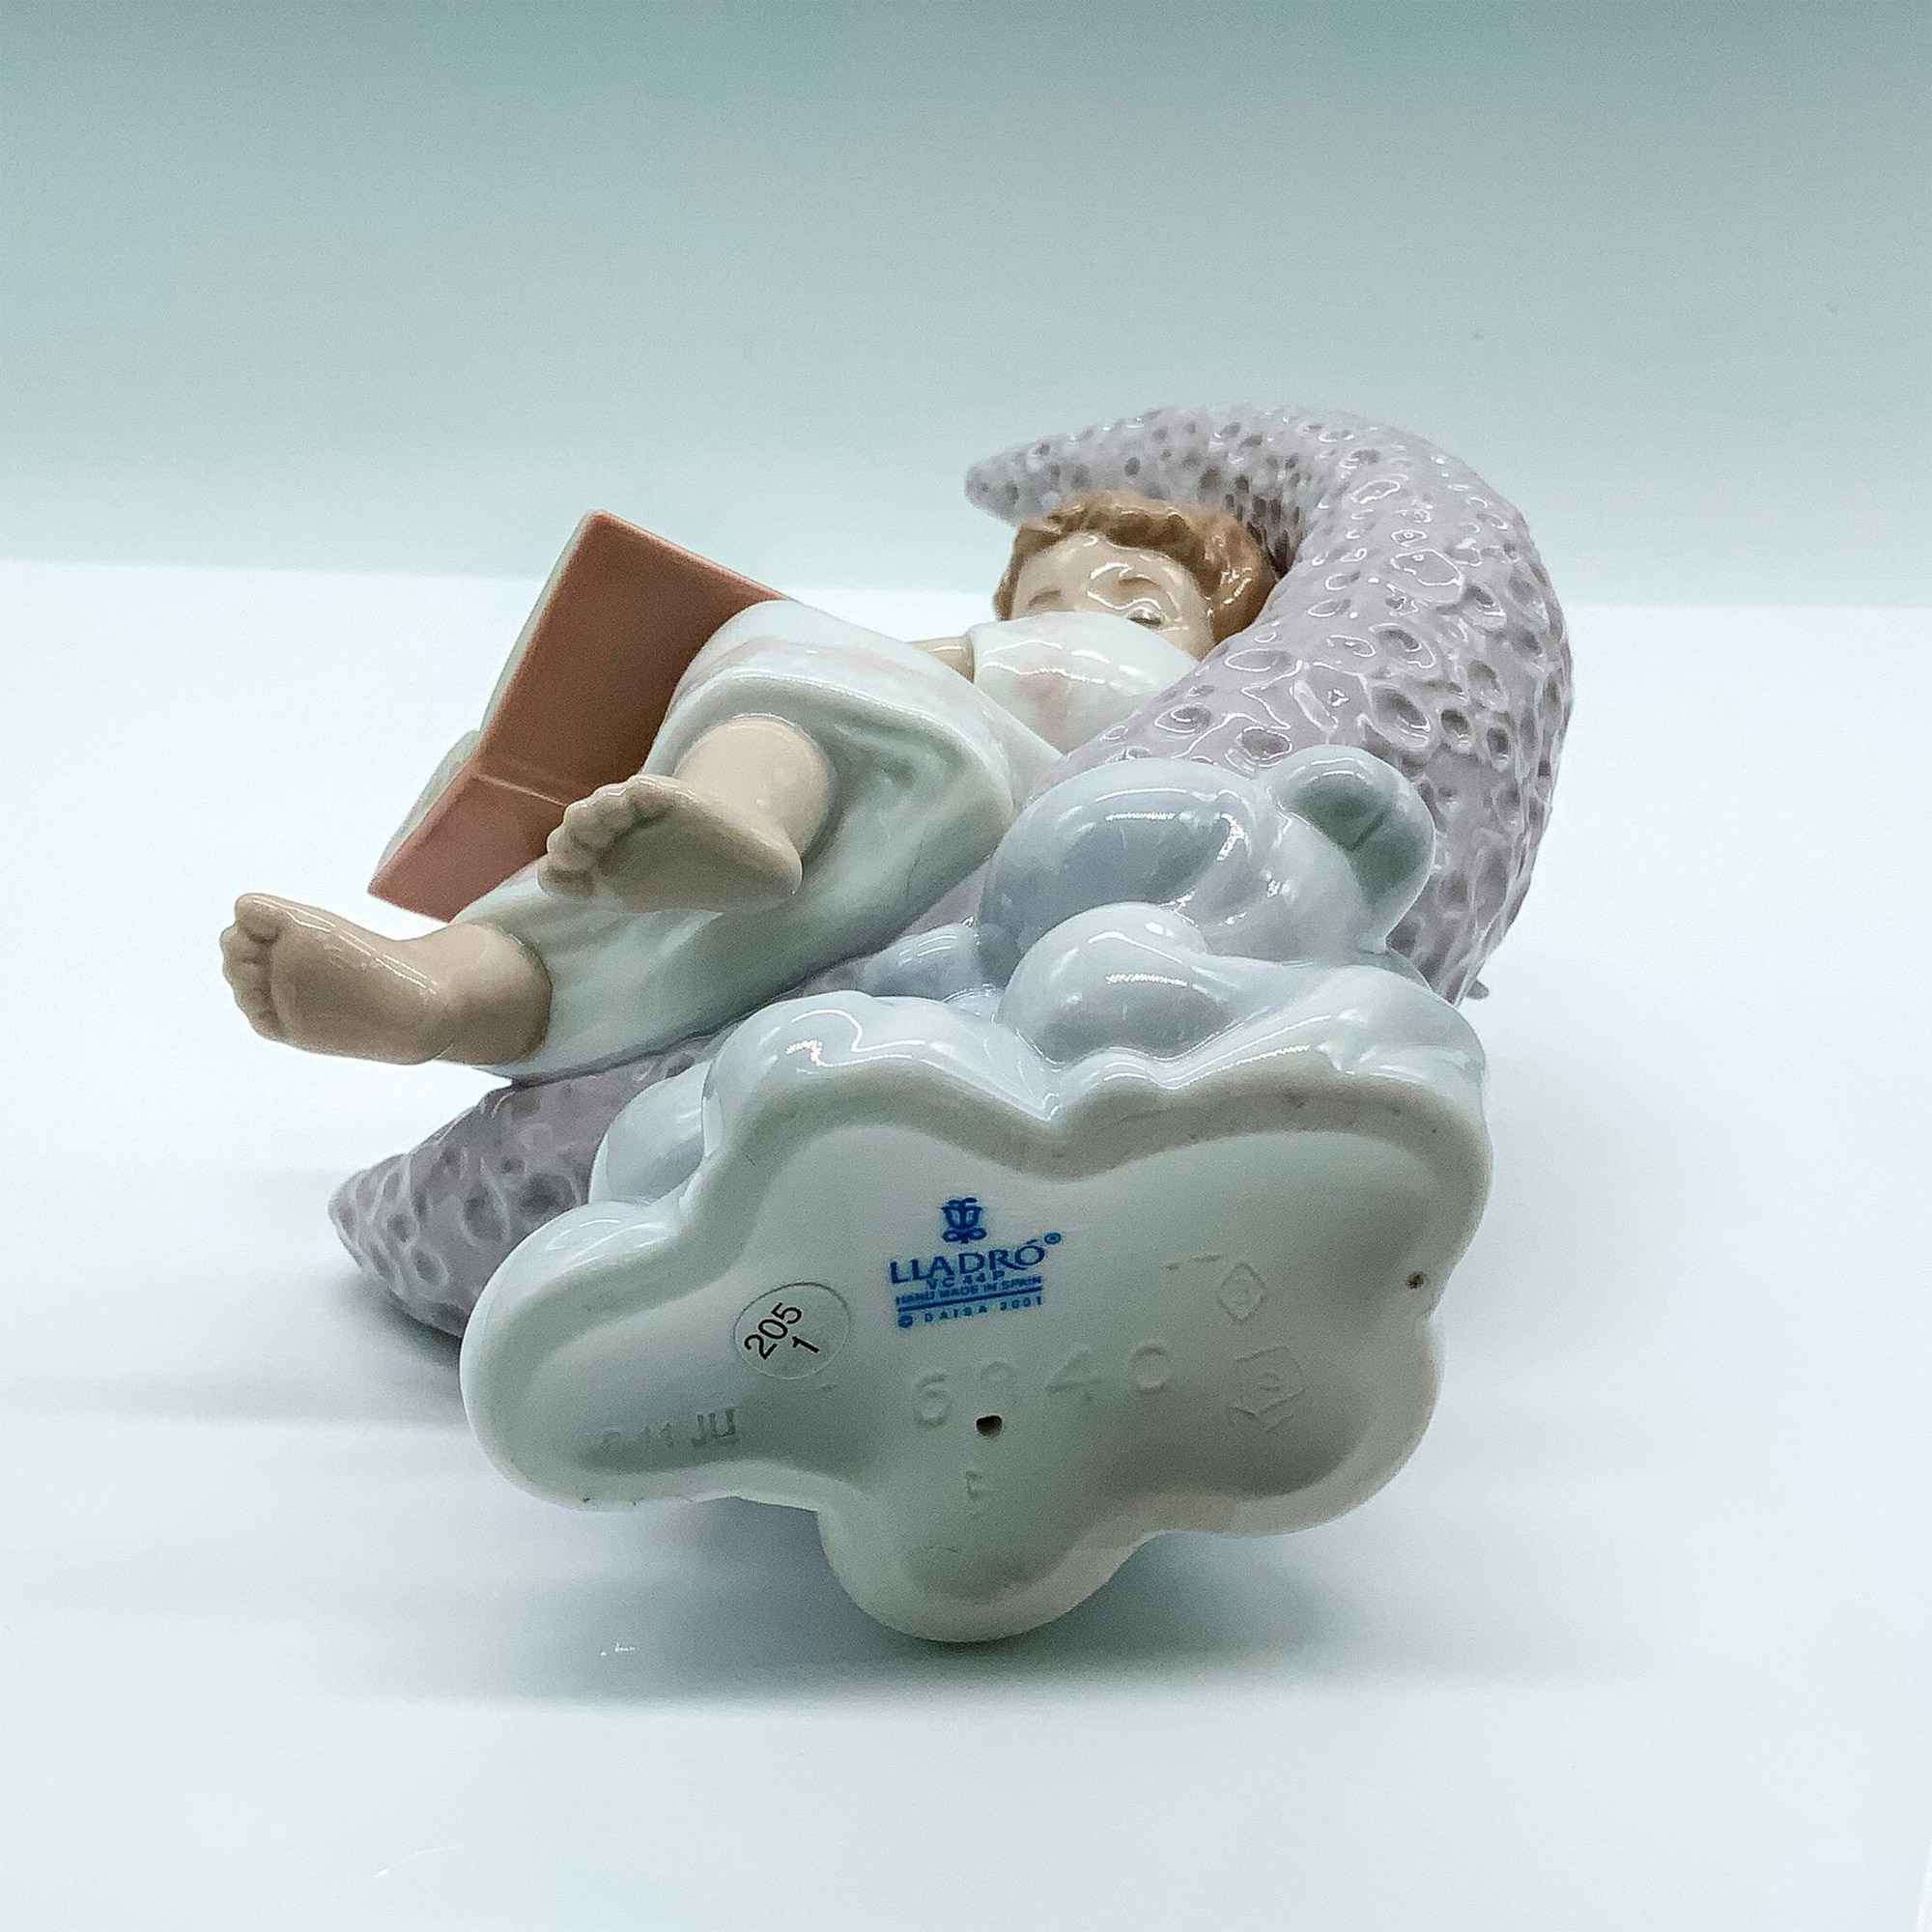 Dreaming Of The Stars 1006840 - Lladro Porcelain Figurine - Image 4 of 4